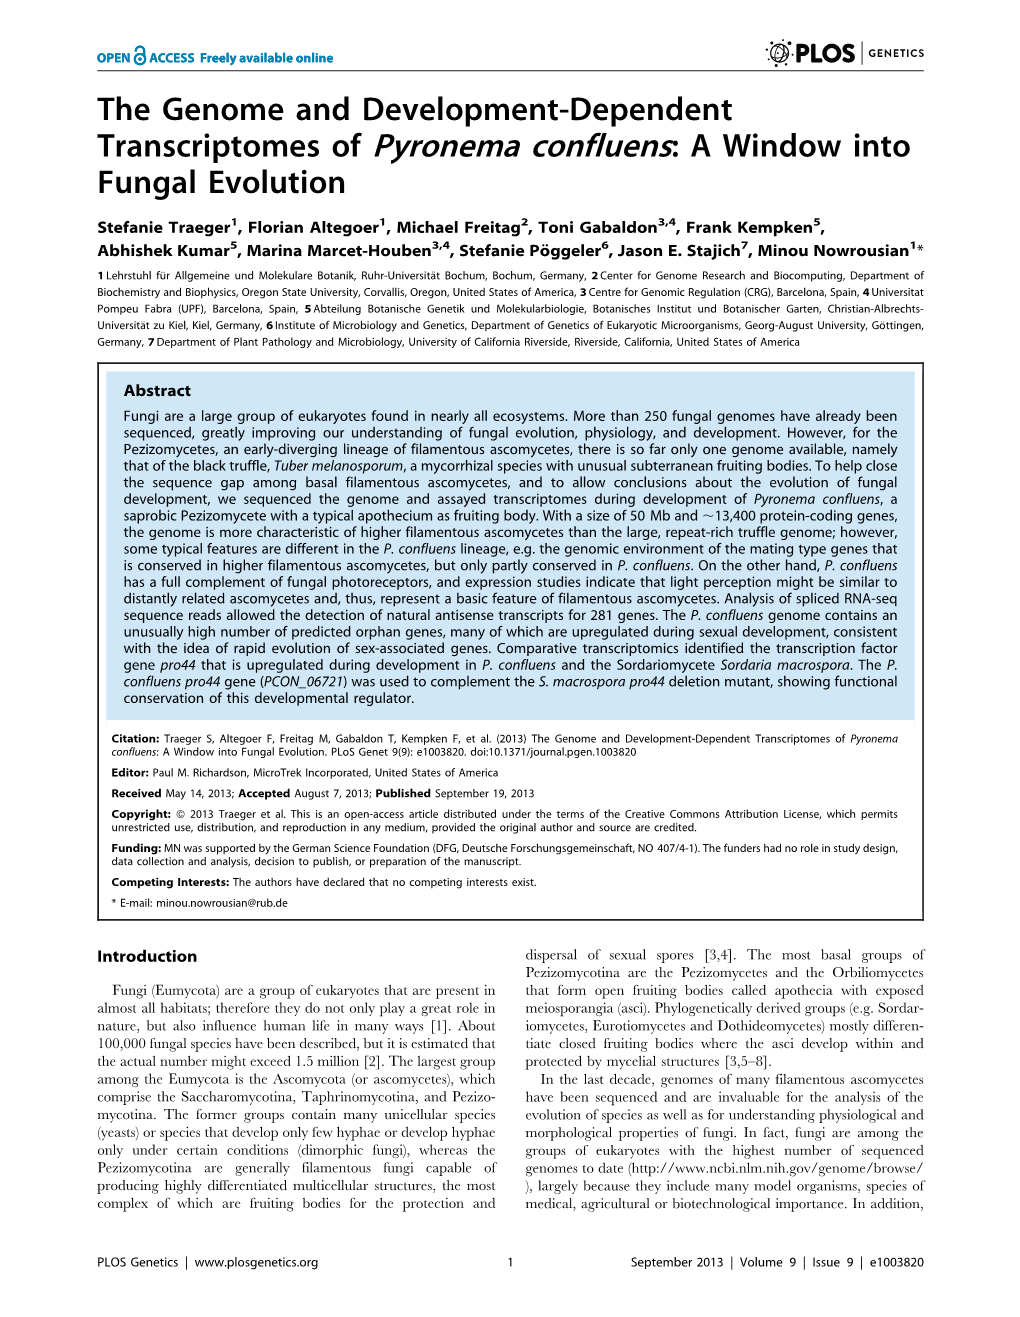 A Window Into Fungal Evolution